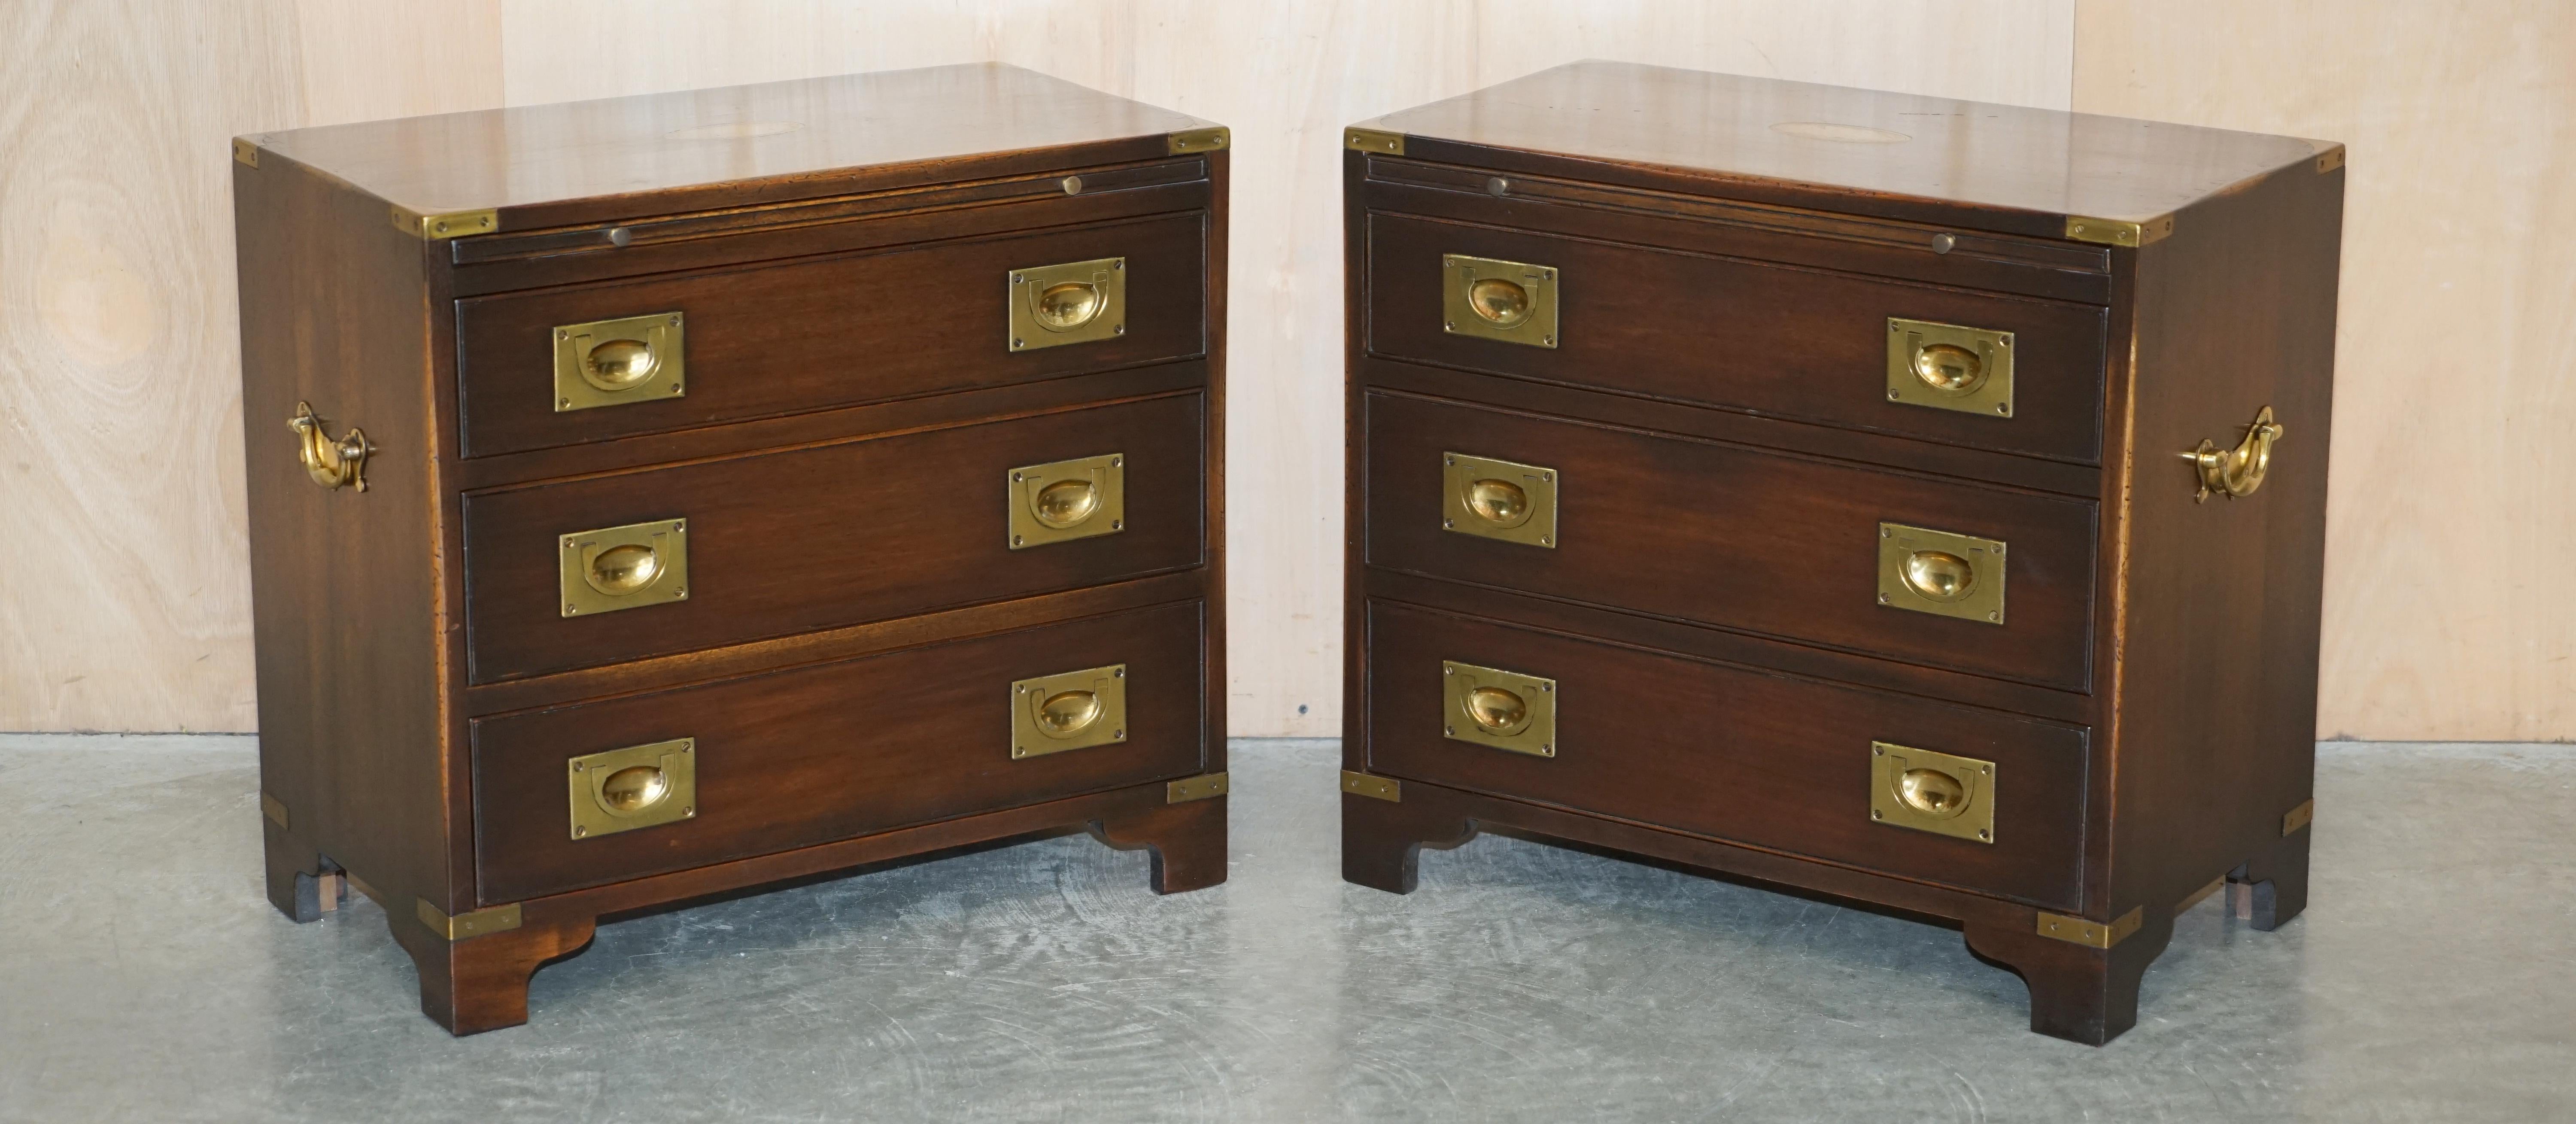 We are delighted to offer for sale this sublime pair of vintage, Harrods Kennedy Military Campaign chest of drawers with slip butlers serving trays 

A truly stunning and well made pair by Kennedy Furniture and retailed through Harrods London,